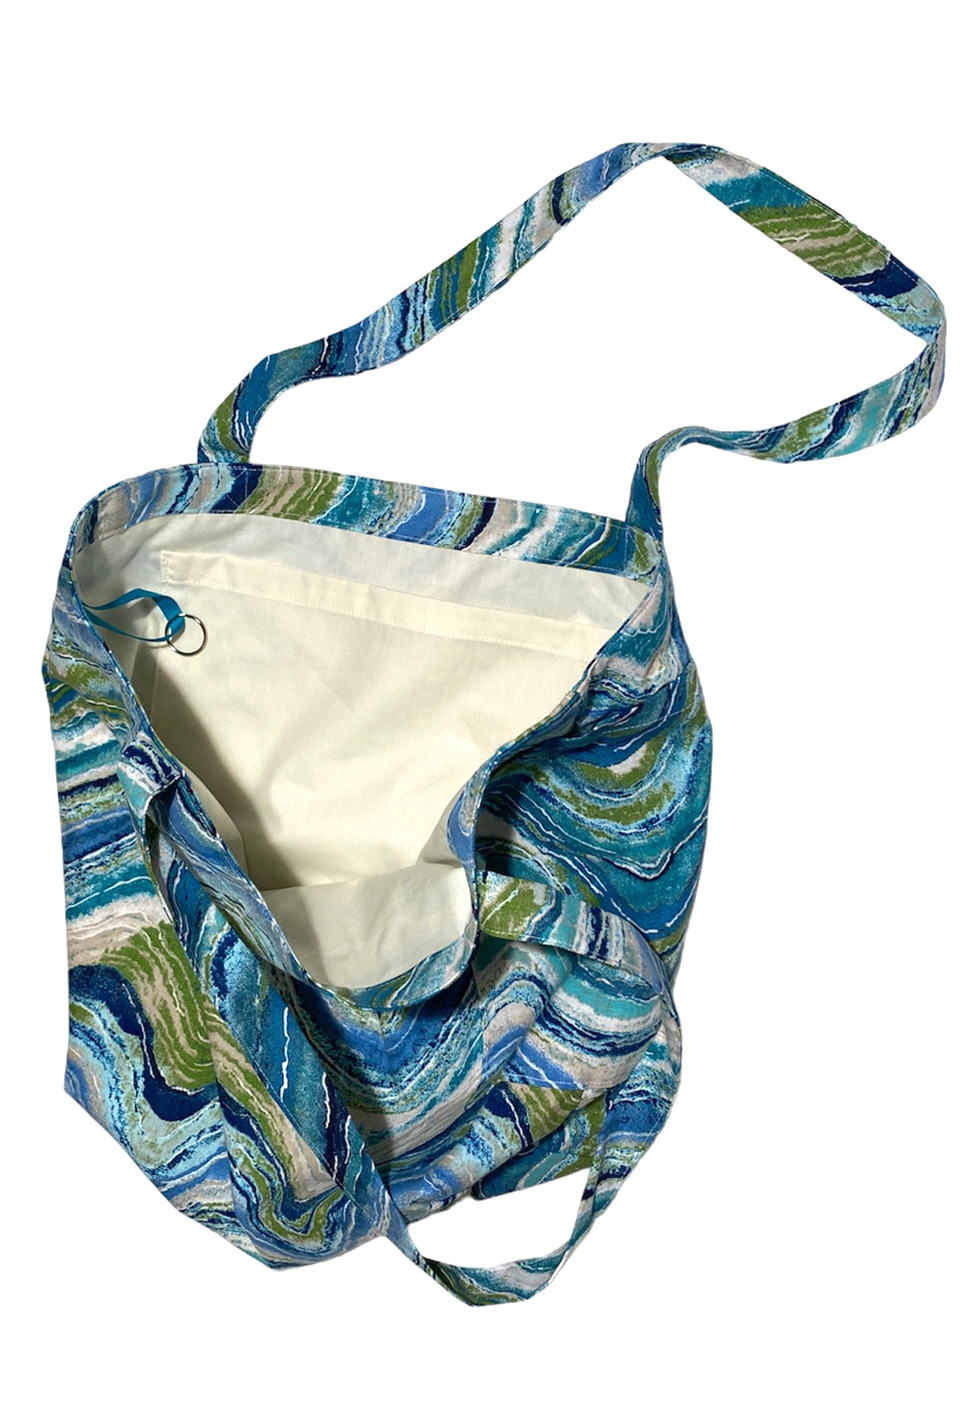 large canvas tote beach bag in colorful wavy print in shades of blue side view